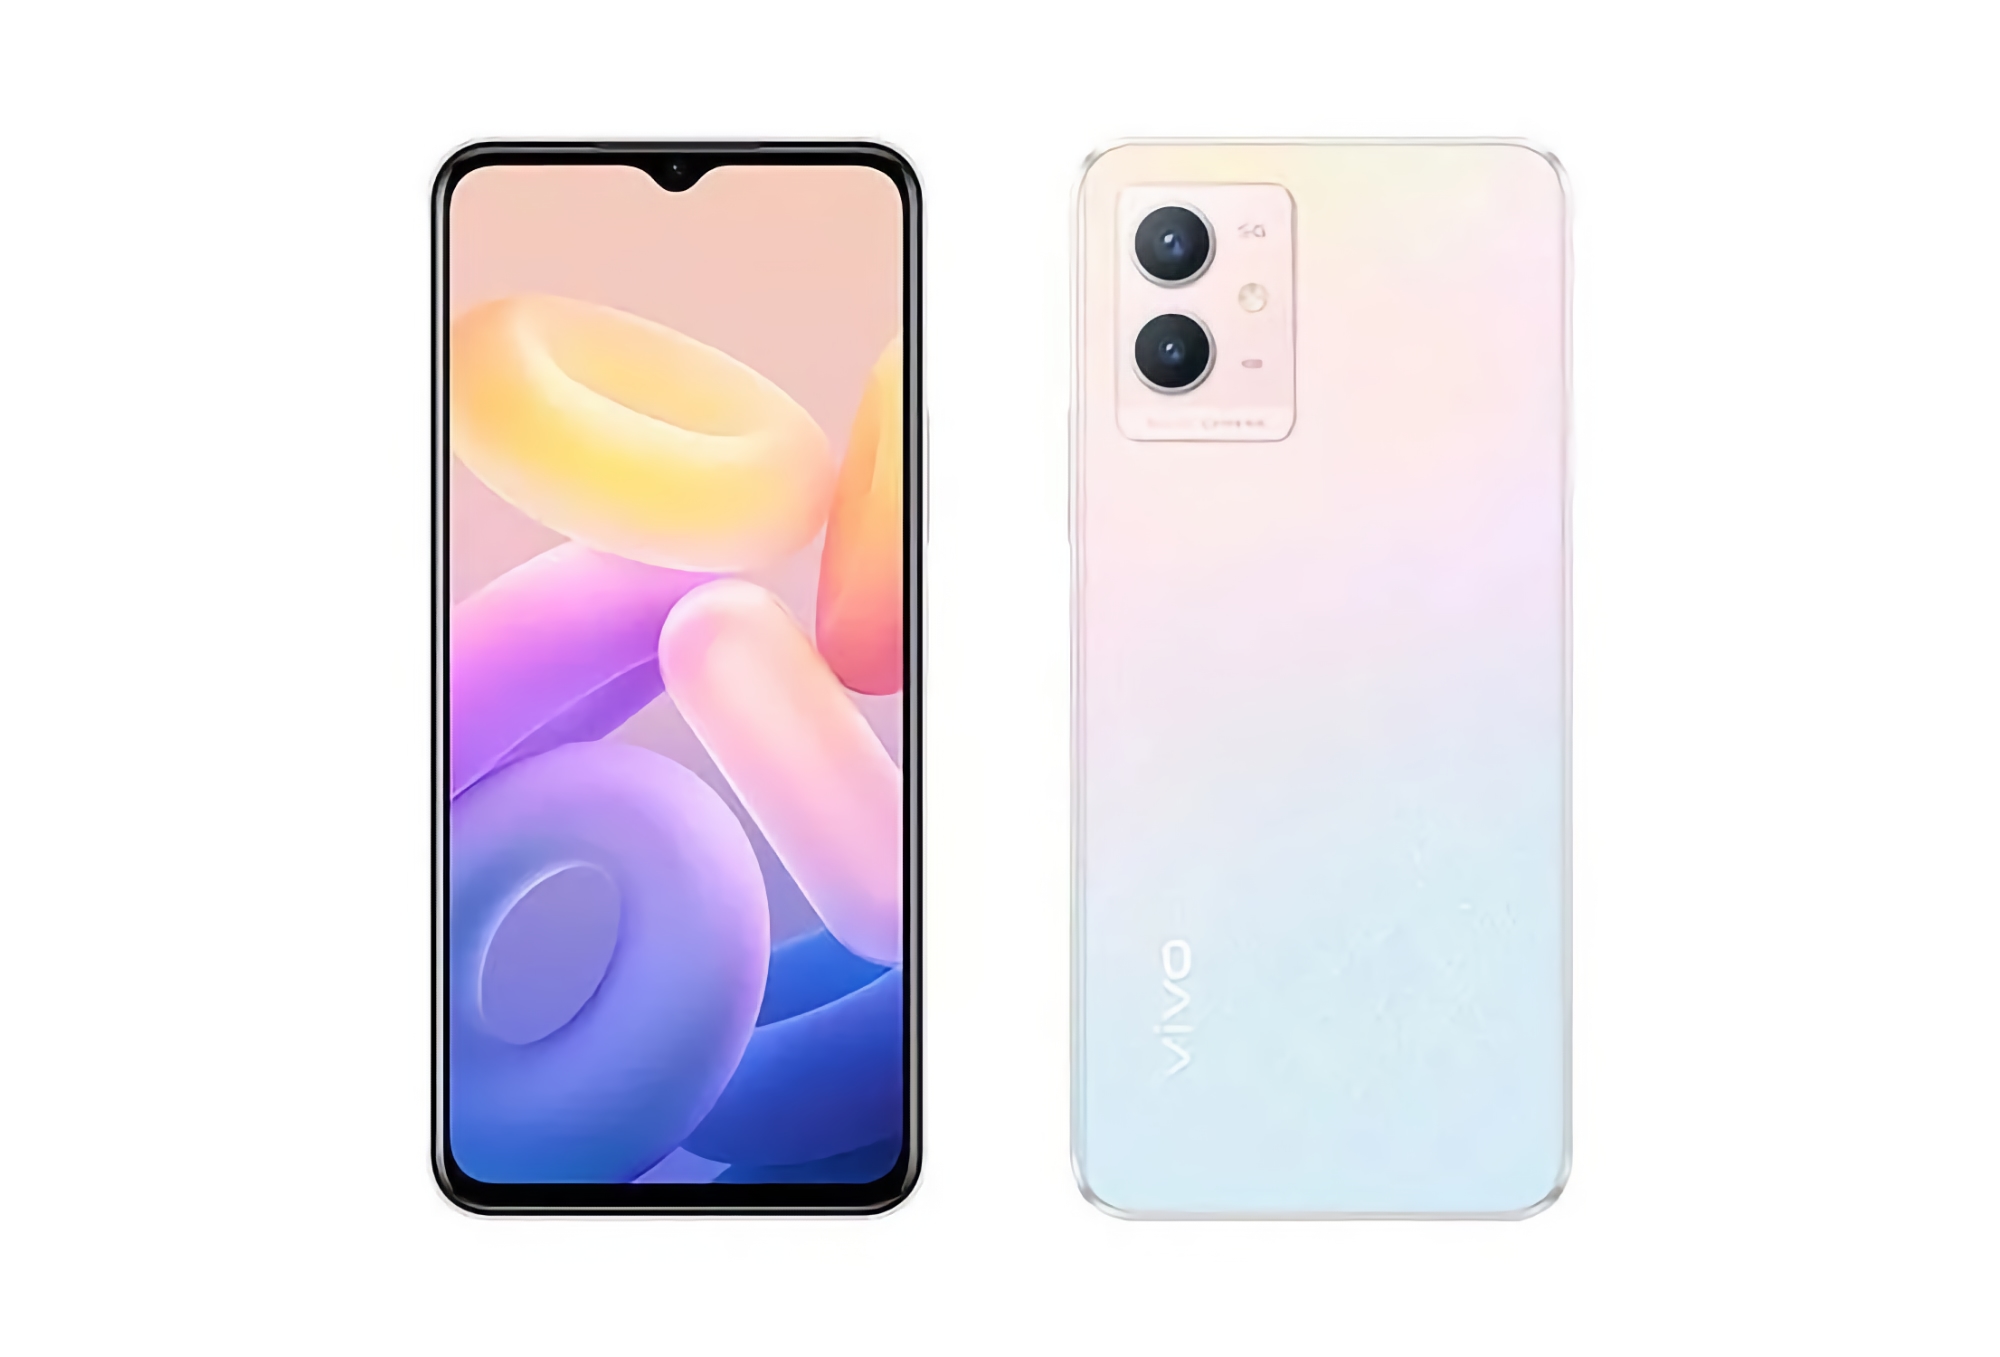 There are never too many budget smartphones: Vivo is preparing to release the Y33s 5G model with a Dimensity 700 chip and a 5000 mAh battery